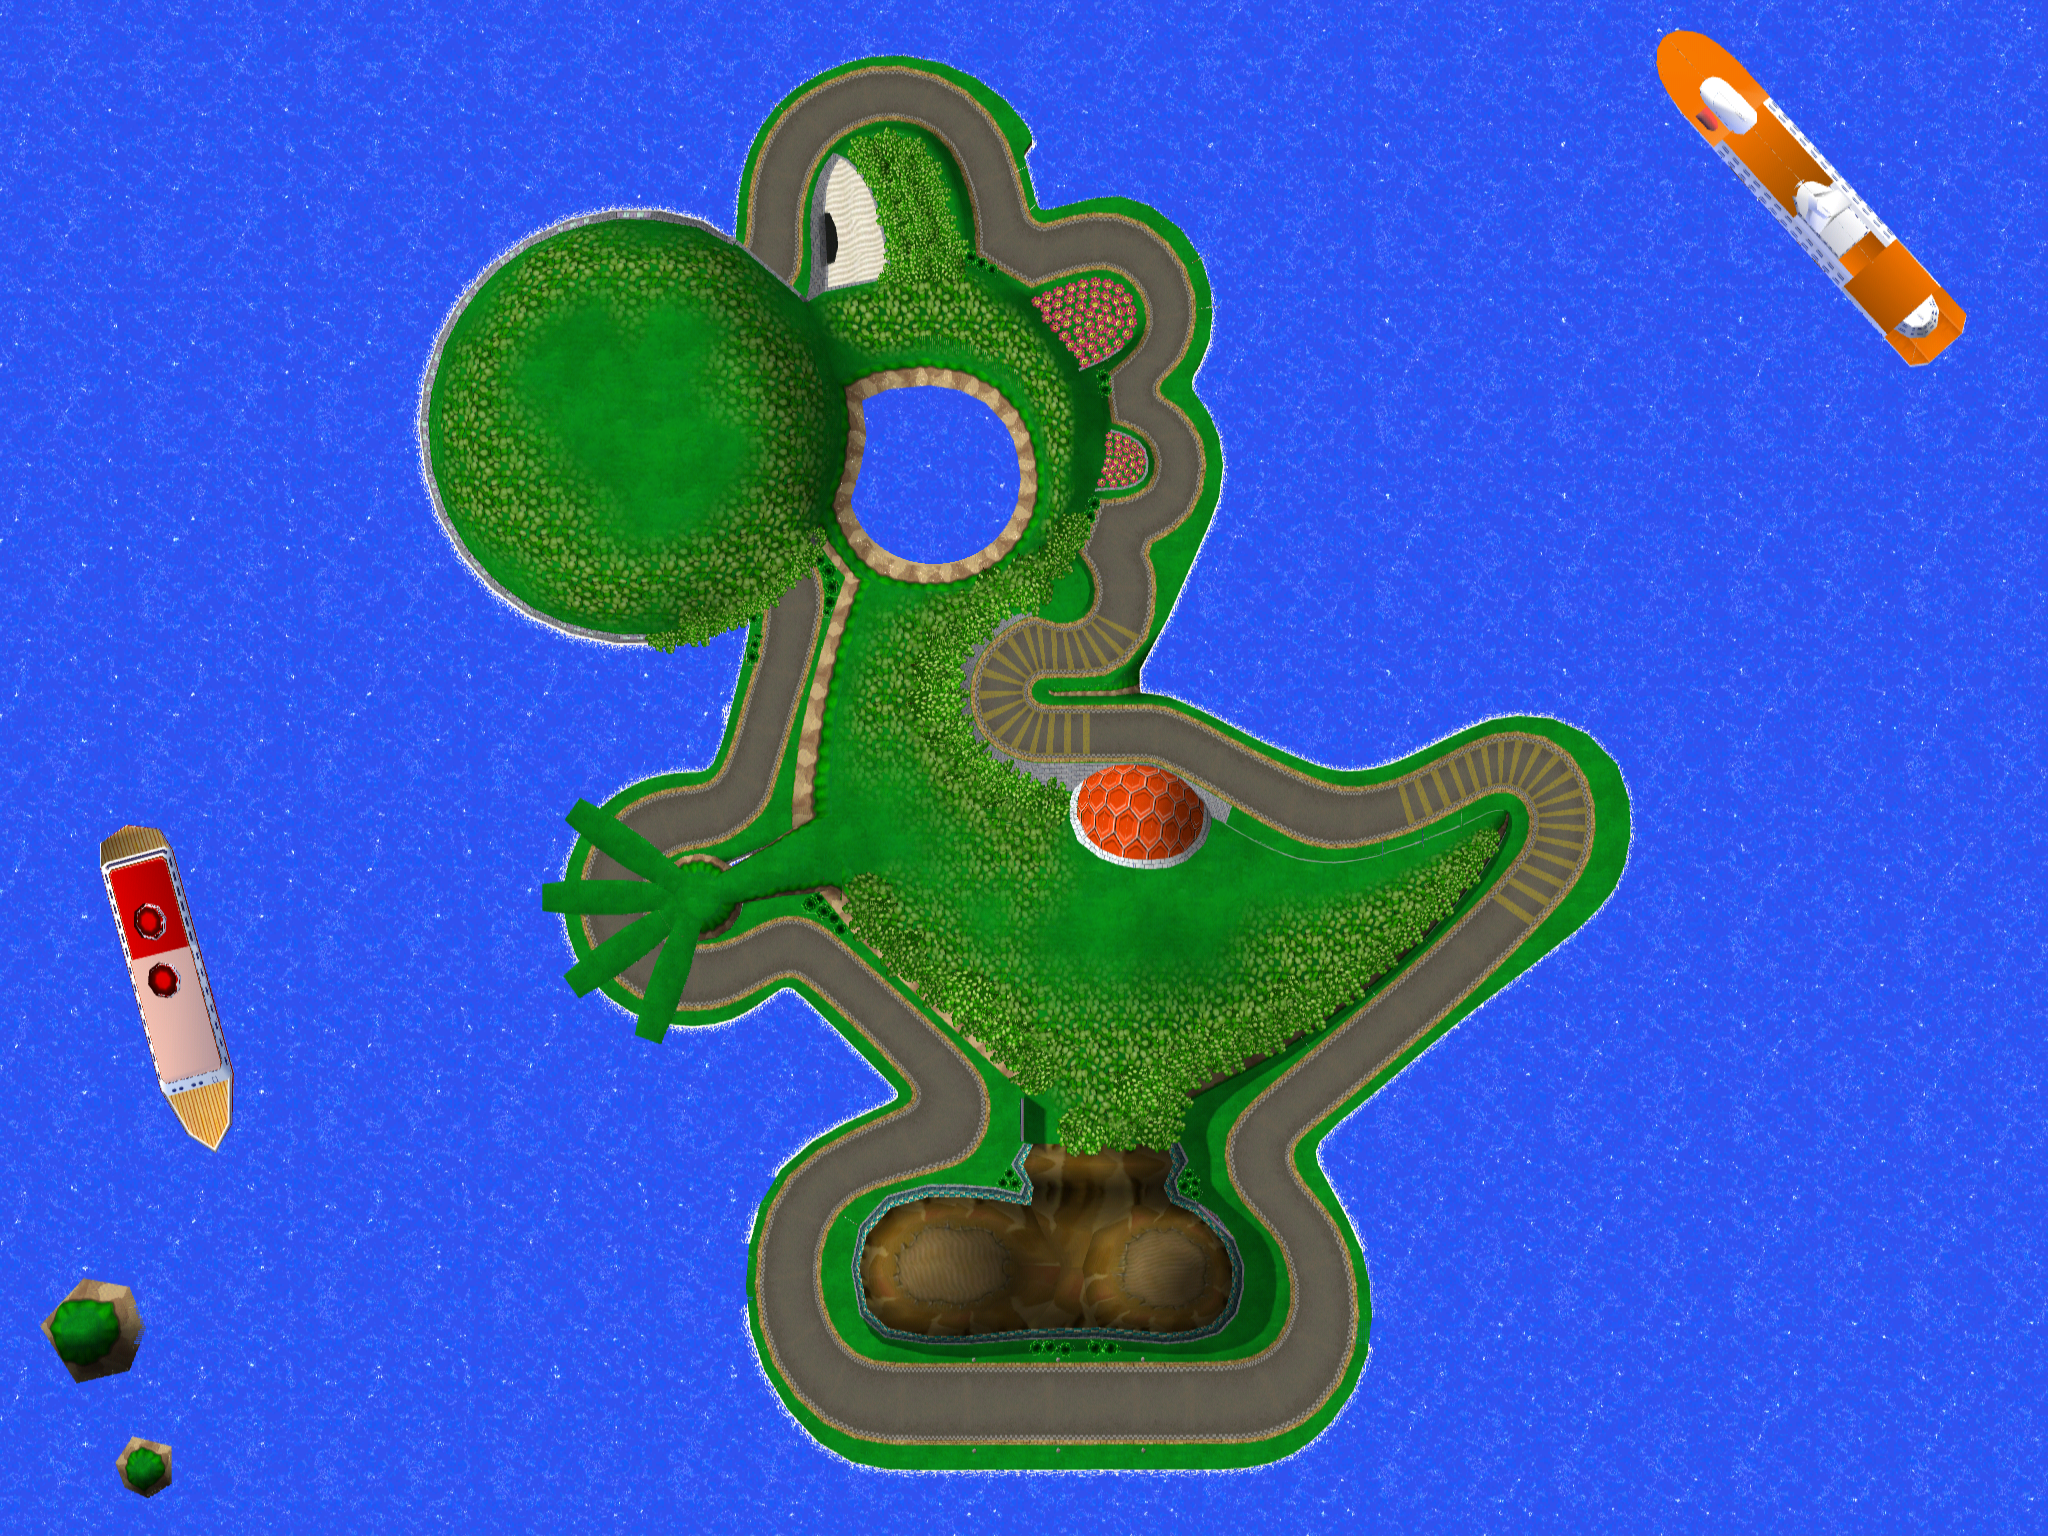 https://mario.wiki.gallery/images/4/4f/MKDD_Yoshi_Circuit_Overhead.png